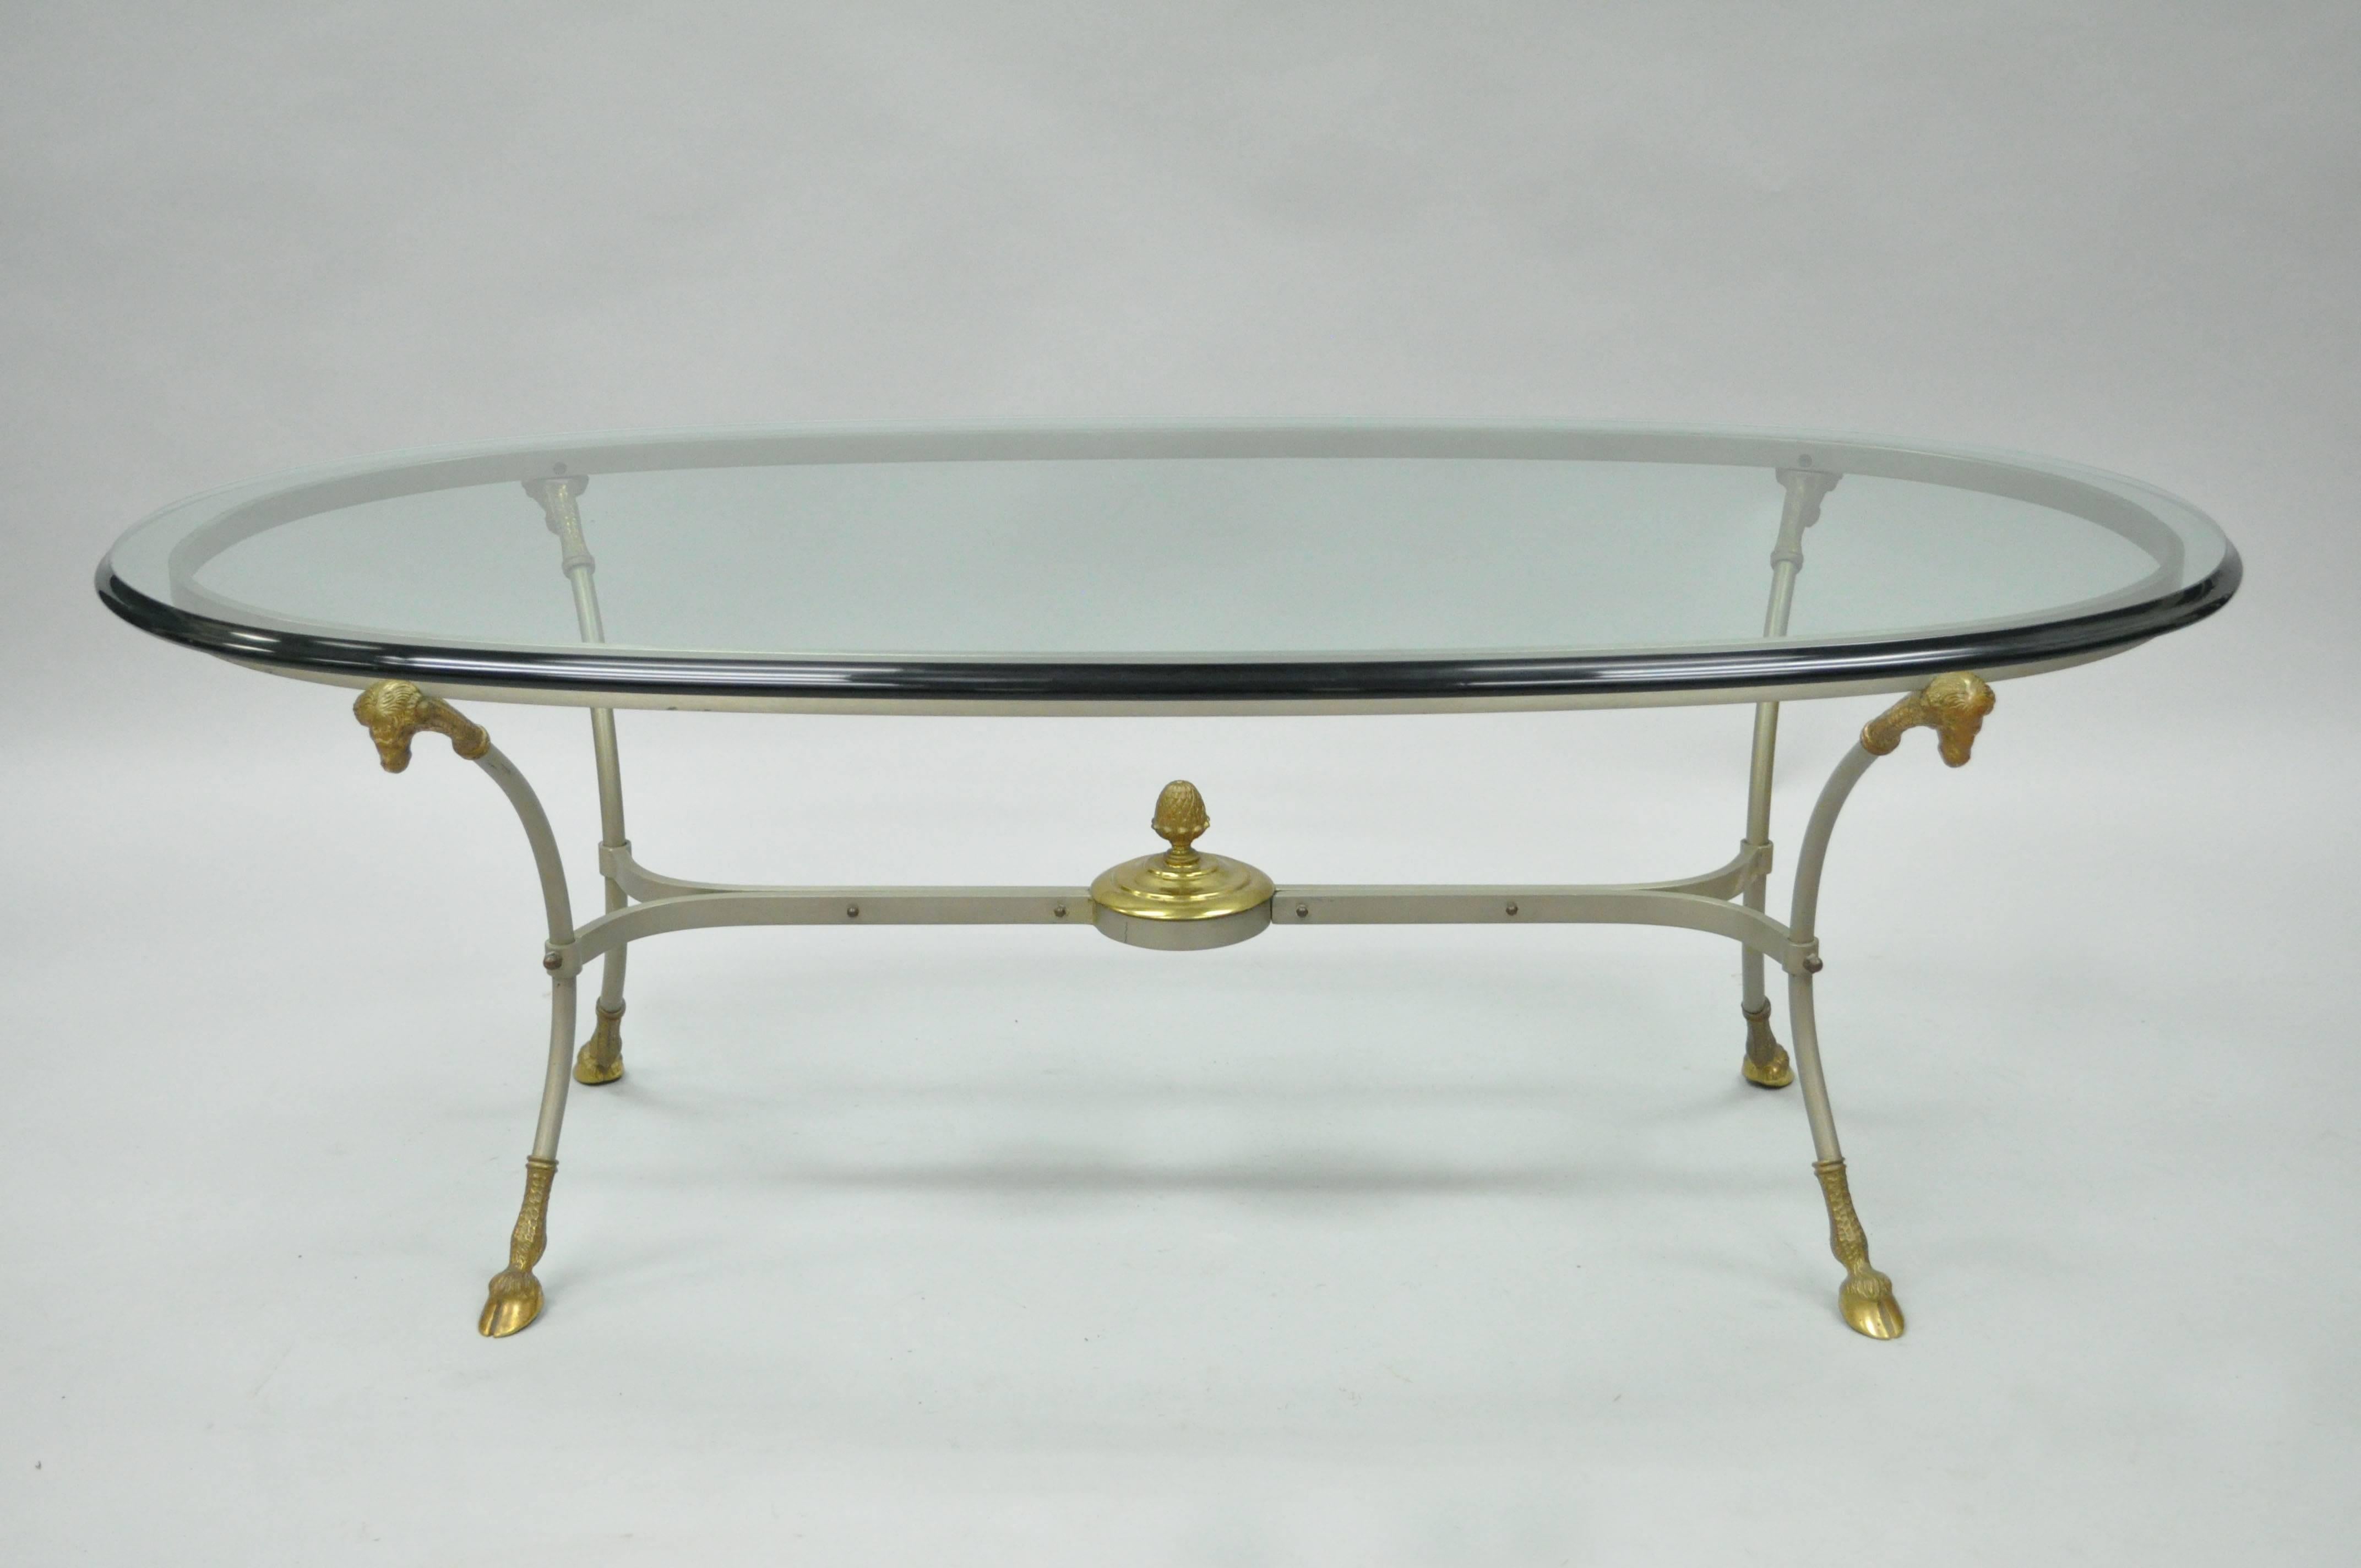 Quality vintage Italian brass and steel Regency style oval coffee table. Item features a thick oval beveled glass top, steel frame with brass ram / goat heads, hairy hoof feet, and central acorn finial. Very rare to find this model coffee table.